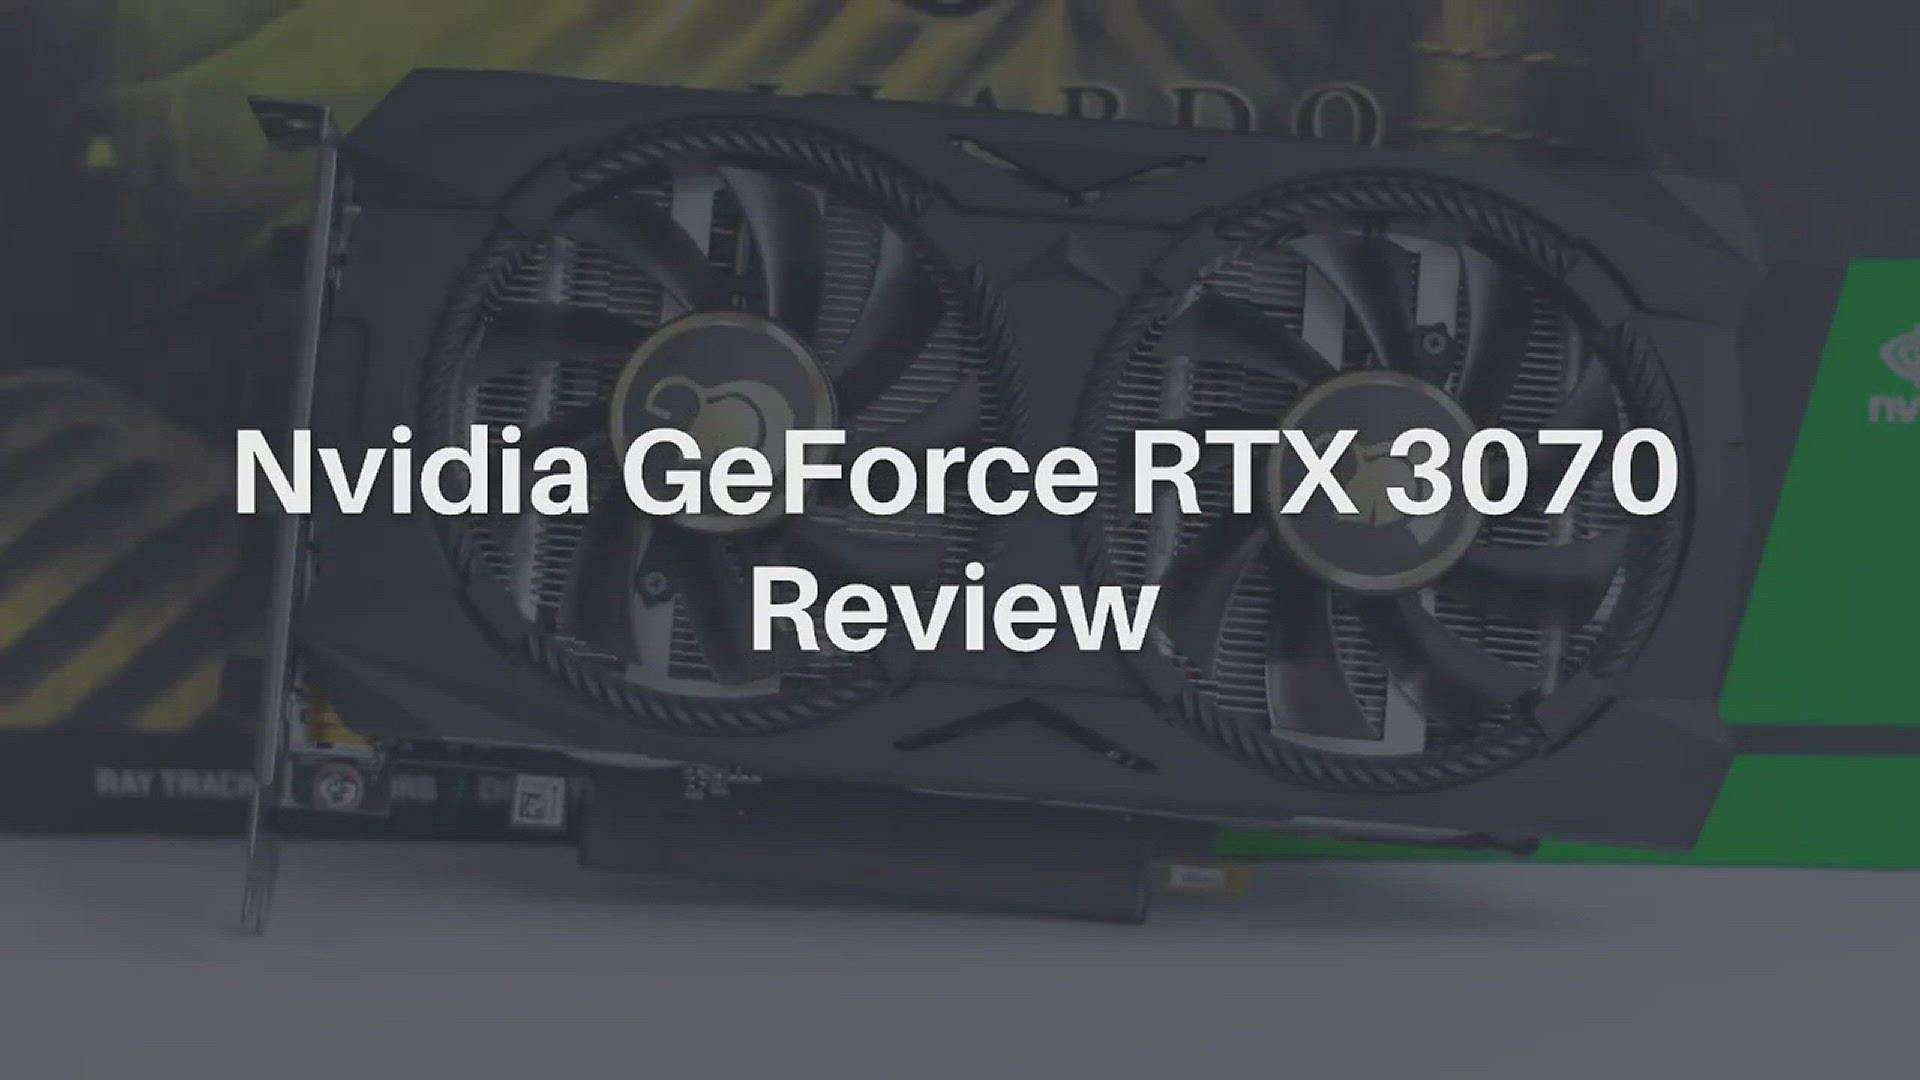 'Video thumbnail for Nvidia GeForce RTX 3070 Review'